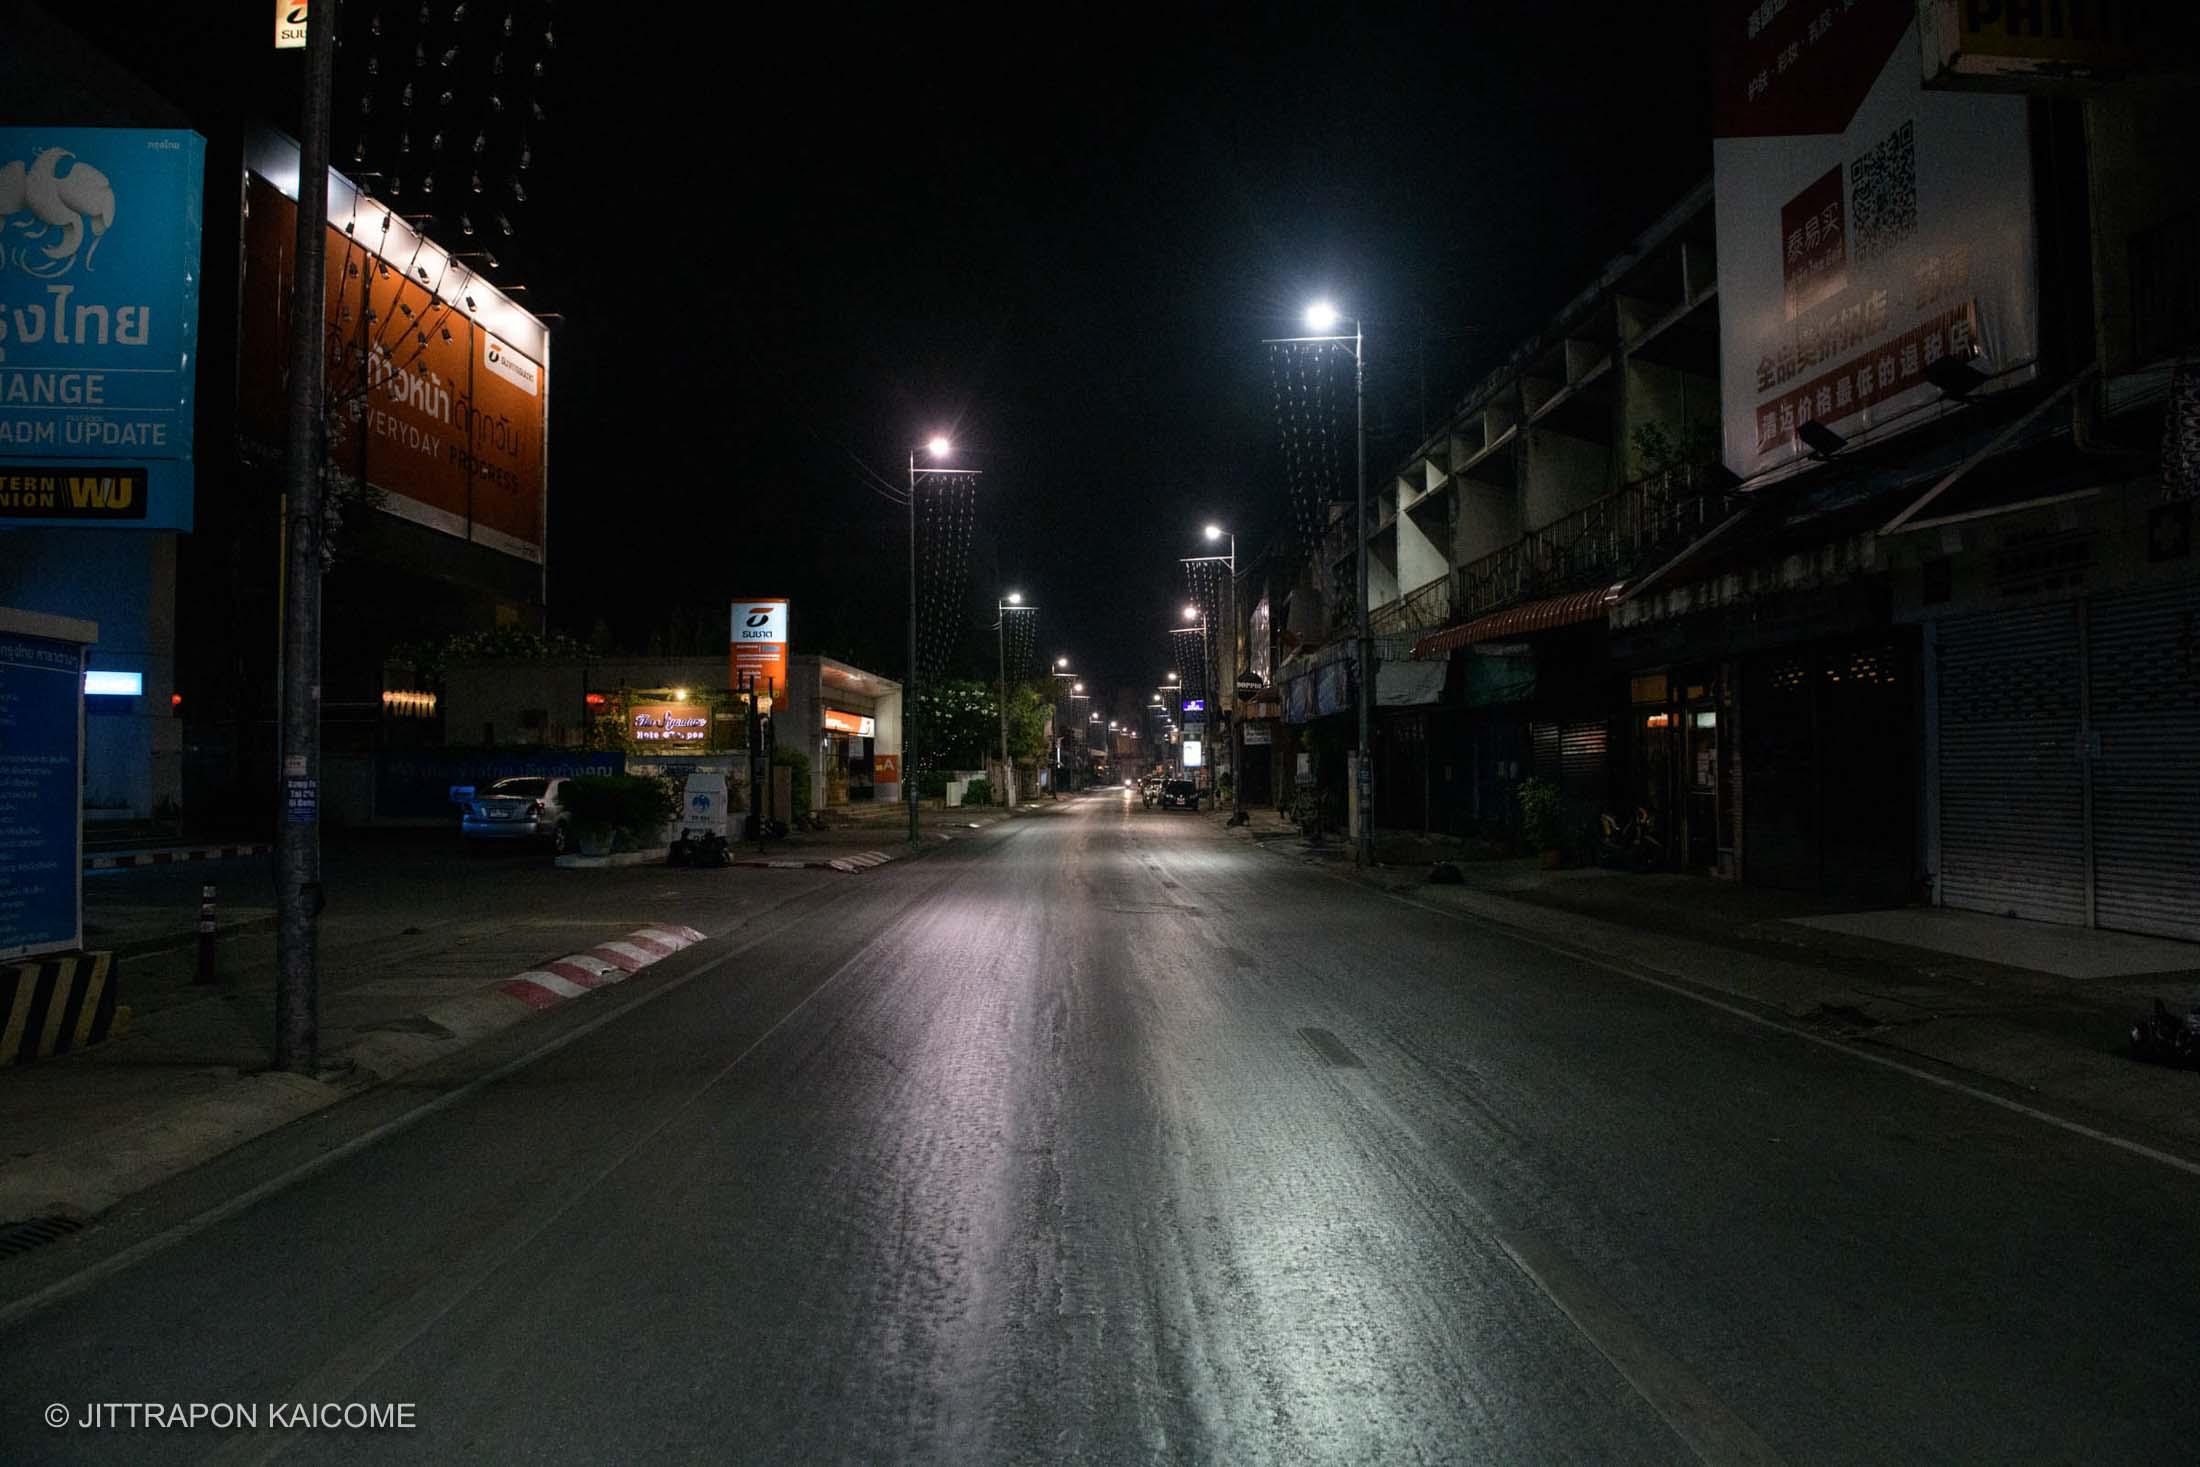 07.52 PM - In the center of Chiang Mai on the Tha Phae Road, it is in the economic area with cafes, bars, restaurants, and other businesses. Now is left empty due to the Coronavirus Outbreak. Chiang Mai, Thailand on March 25, 2020.